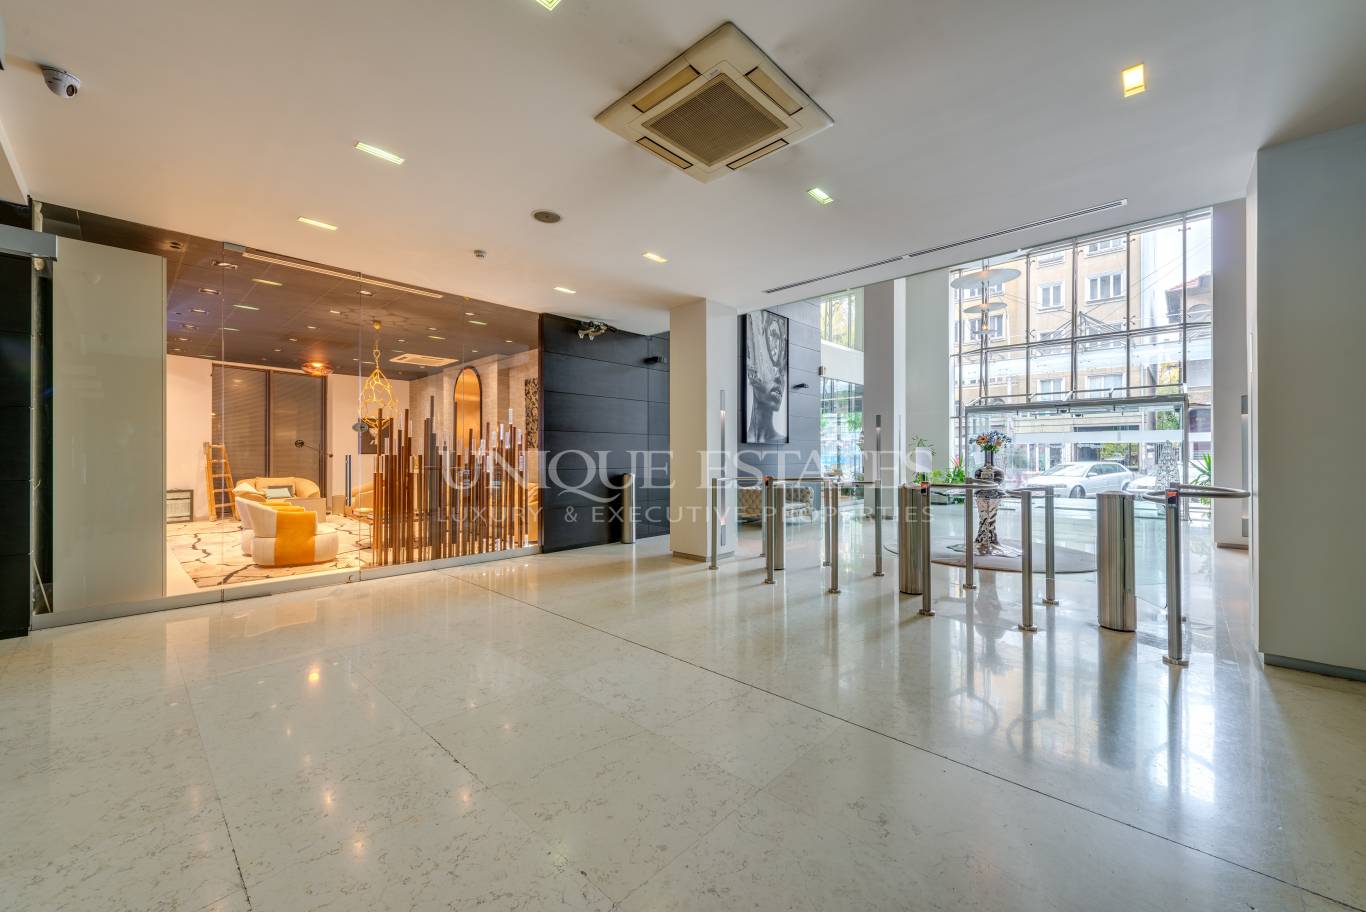 Office for rent in Sofia, Downtown with listing ID: K14421 - image 3